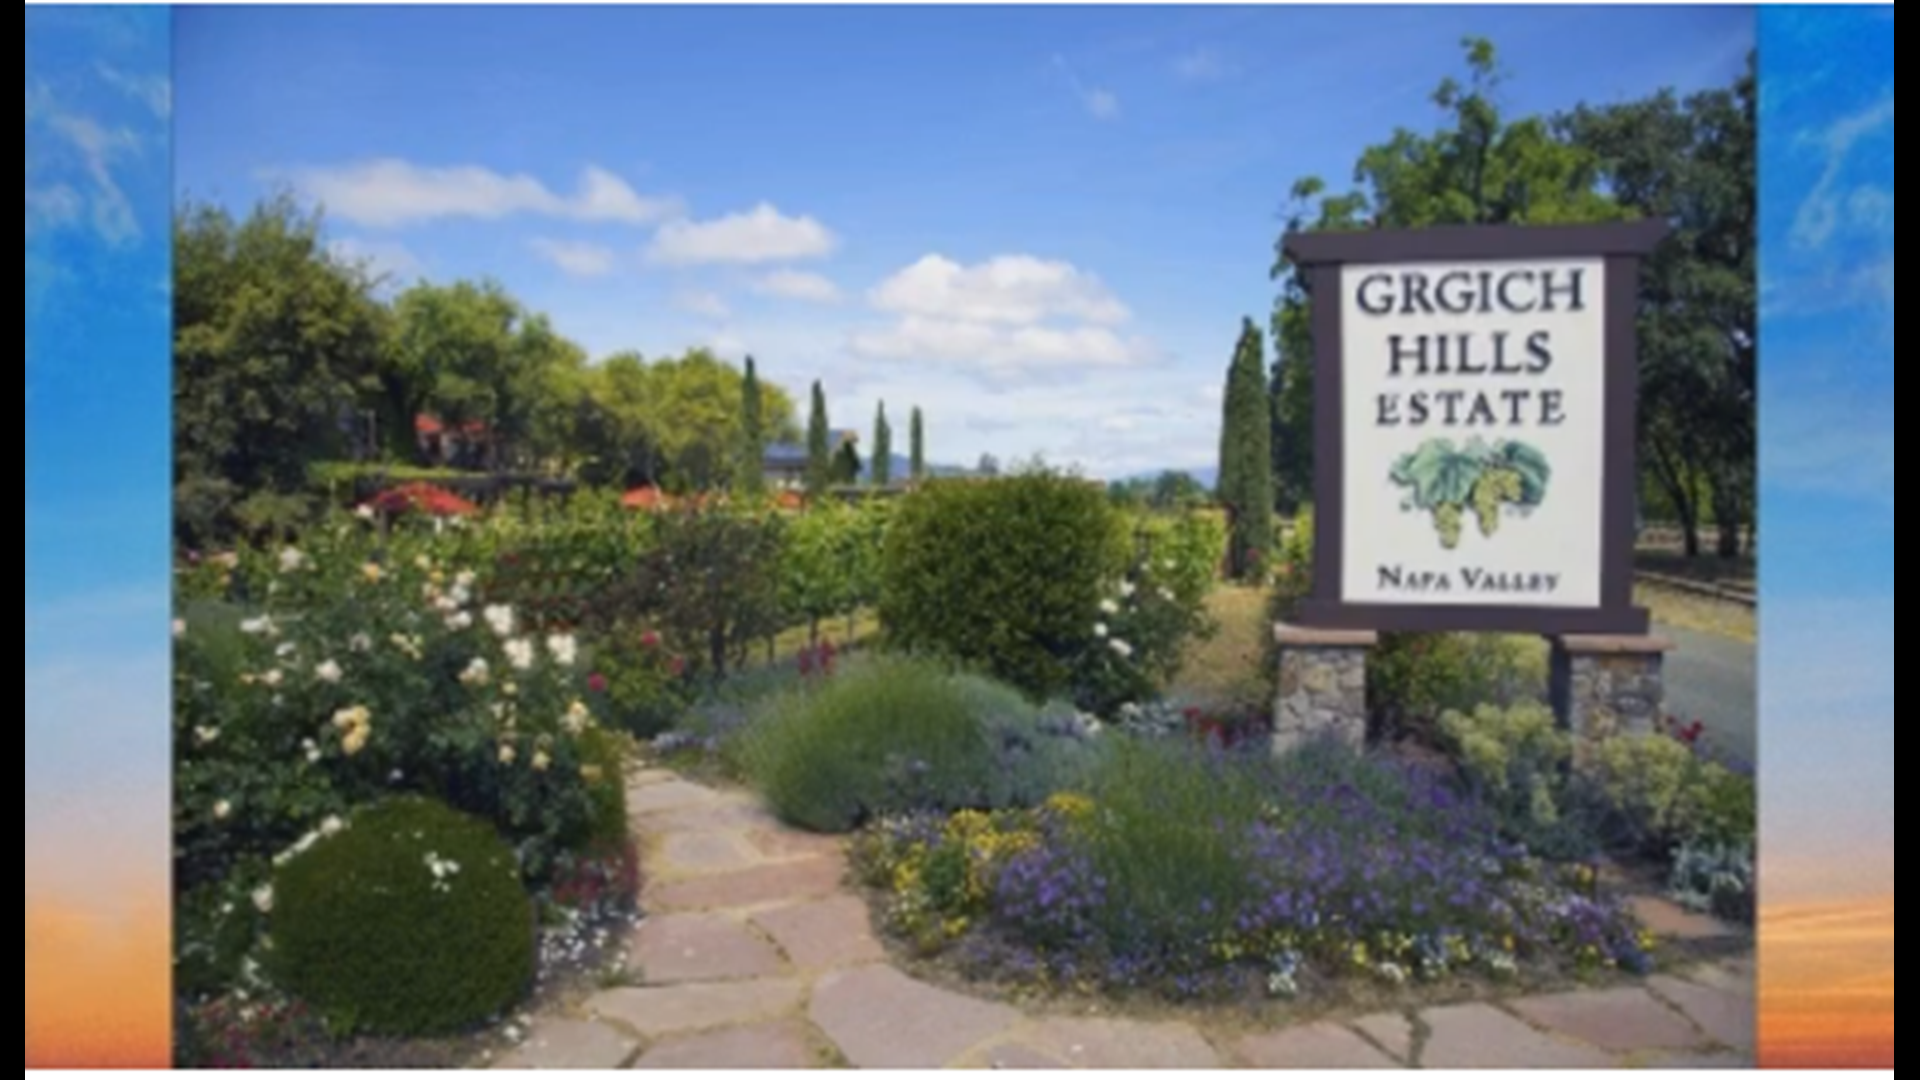 Louisville chef John Varanese has a special affection for California’s Napa Valley wineries, and each year he hosts a five-course wine dinner at his namesake restaurant. This year the Grgich Hills wine dinner is scheduled January 22 & 23, 2019 at Varanese, 2106 Frankfort Avenue, Louisville, KY. To make a reservation, call 502-899-9904. See the menu online at Varanese.com.